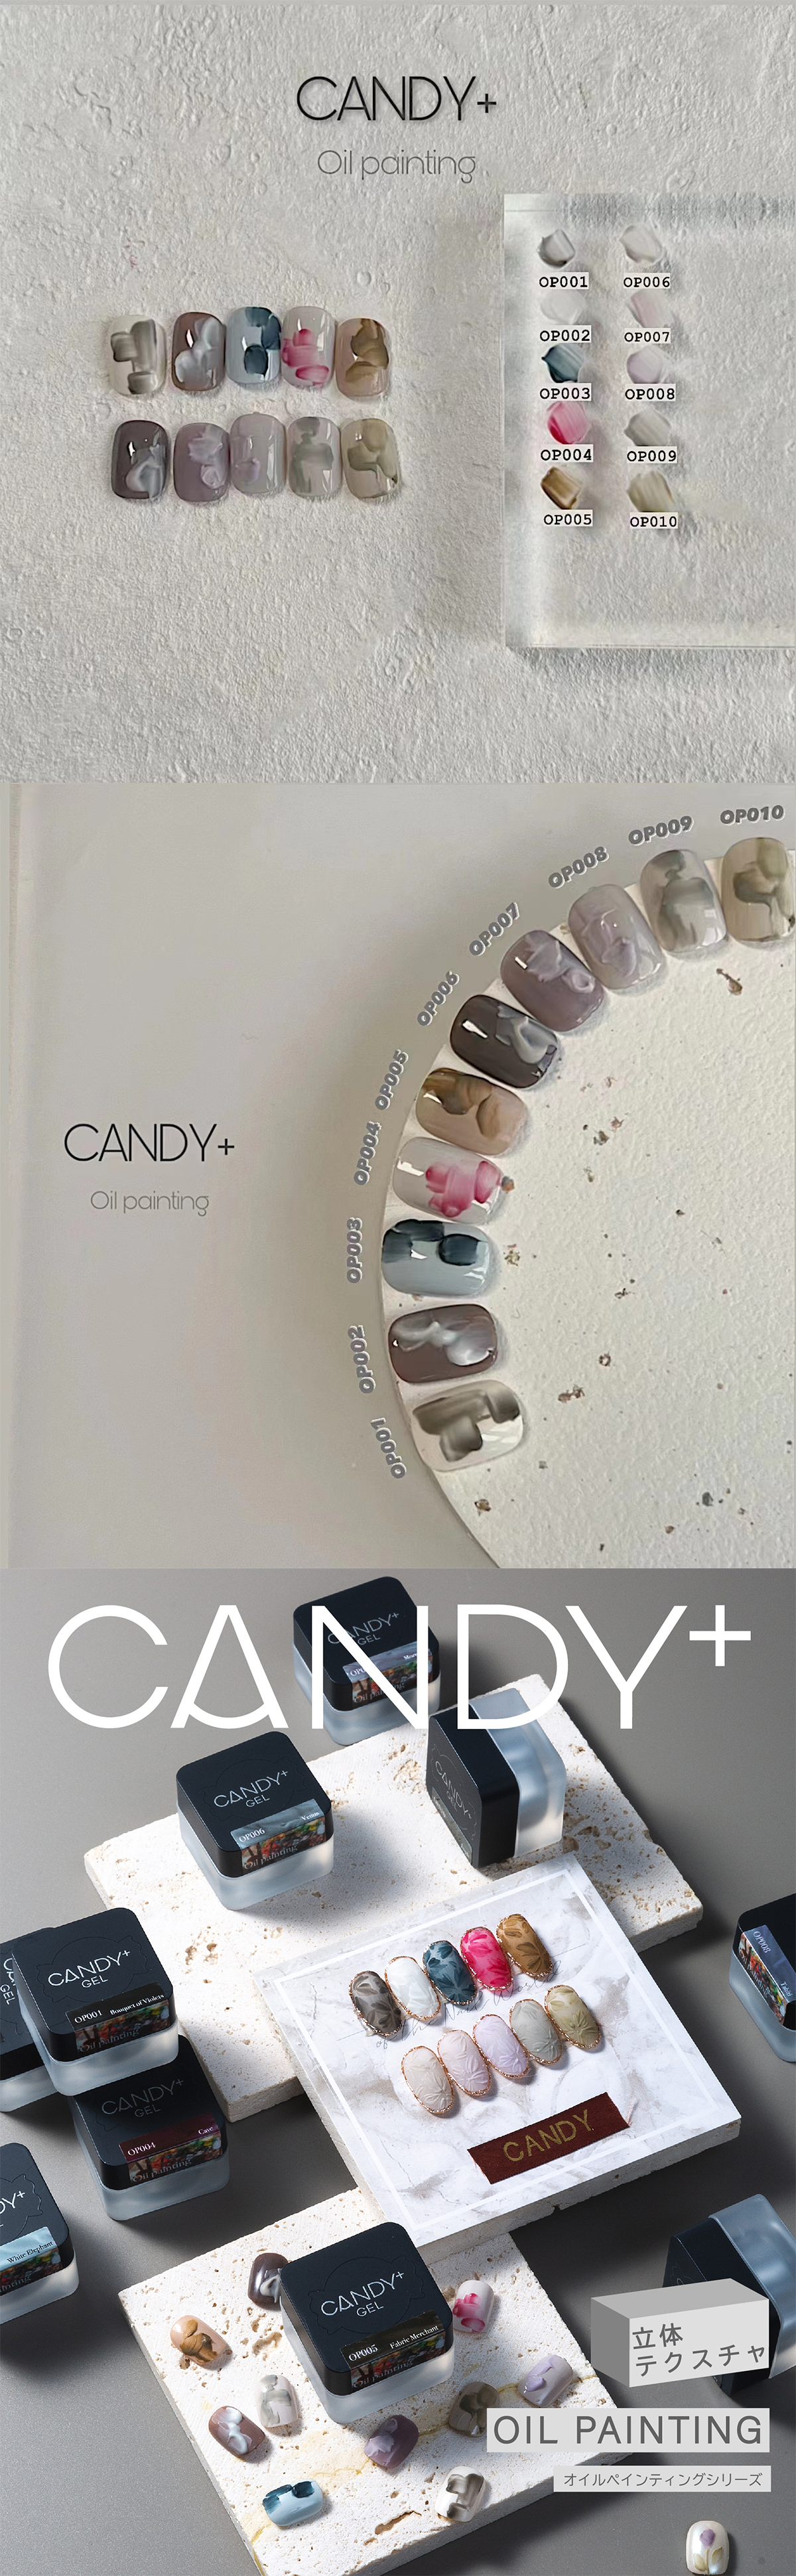 candy+ oil painting